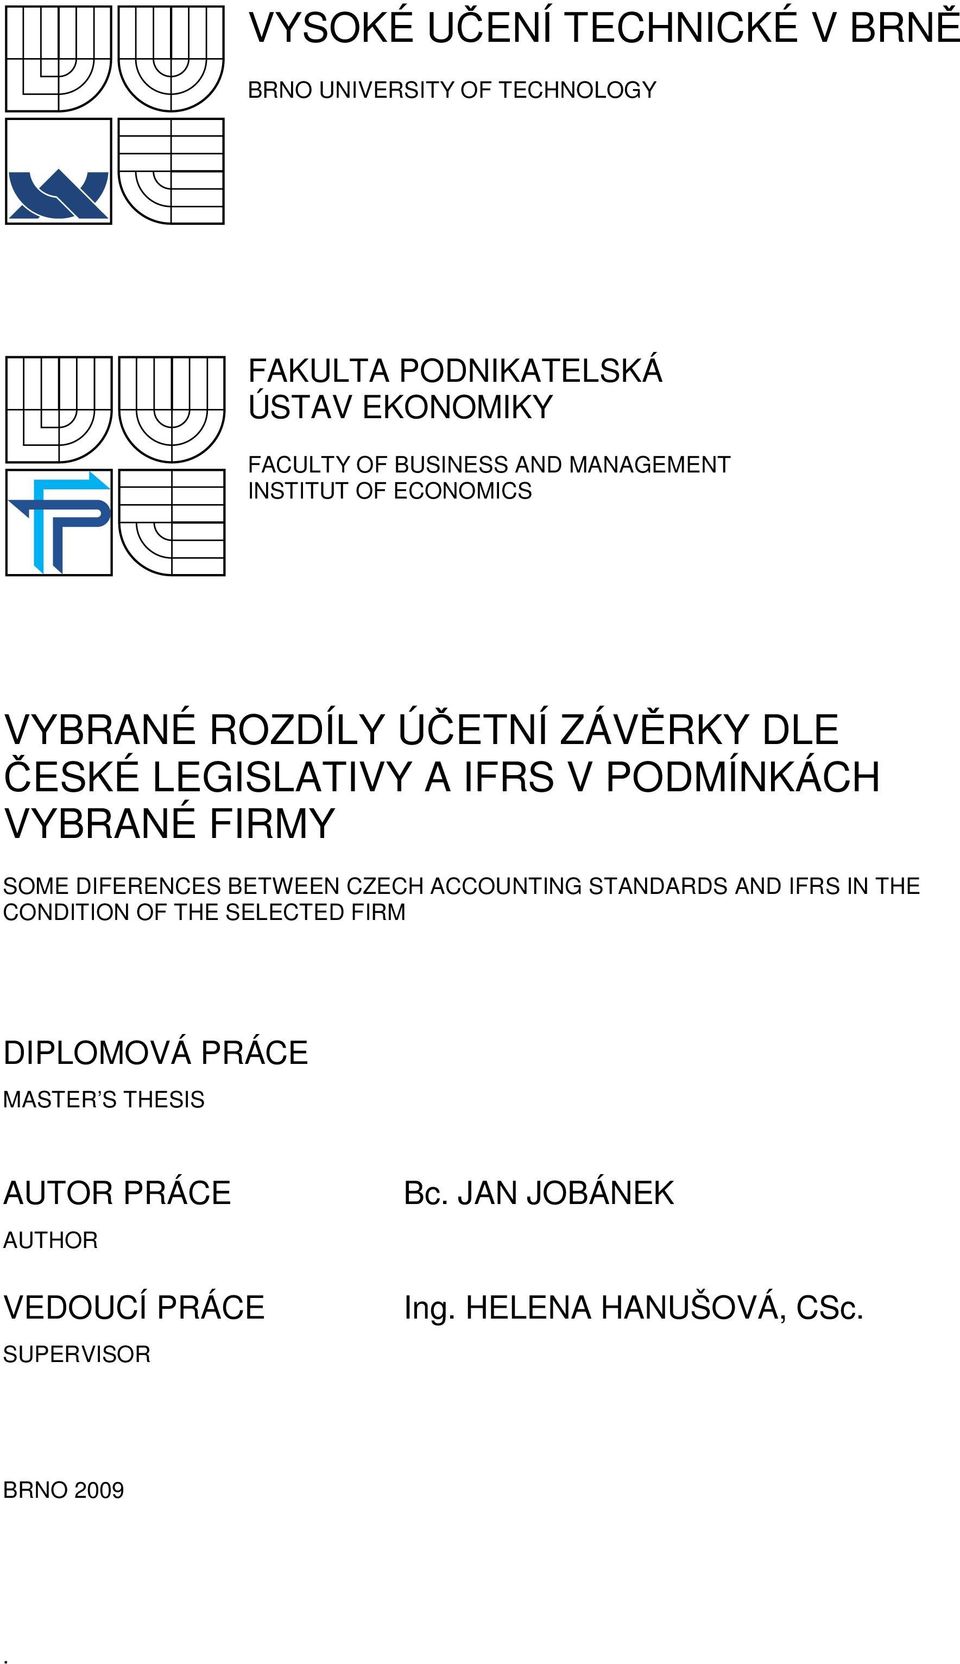 FIRMY SOME DIFERENCES BETWEEN CZECH ACCOUNTING STANDARDS AND IFRS IN THE CONDITION OF THE SELECTED FIRM DIPLOMOVÁ